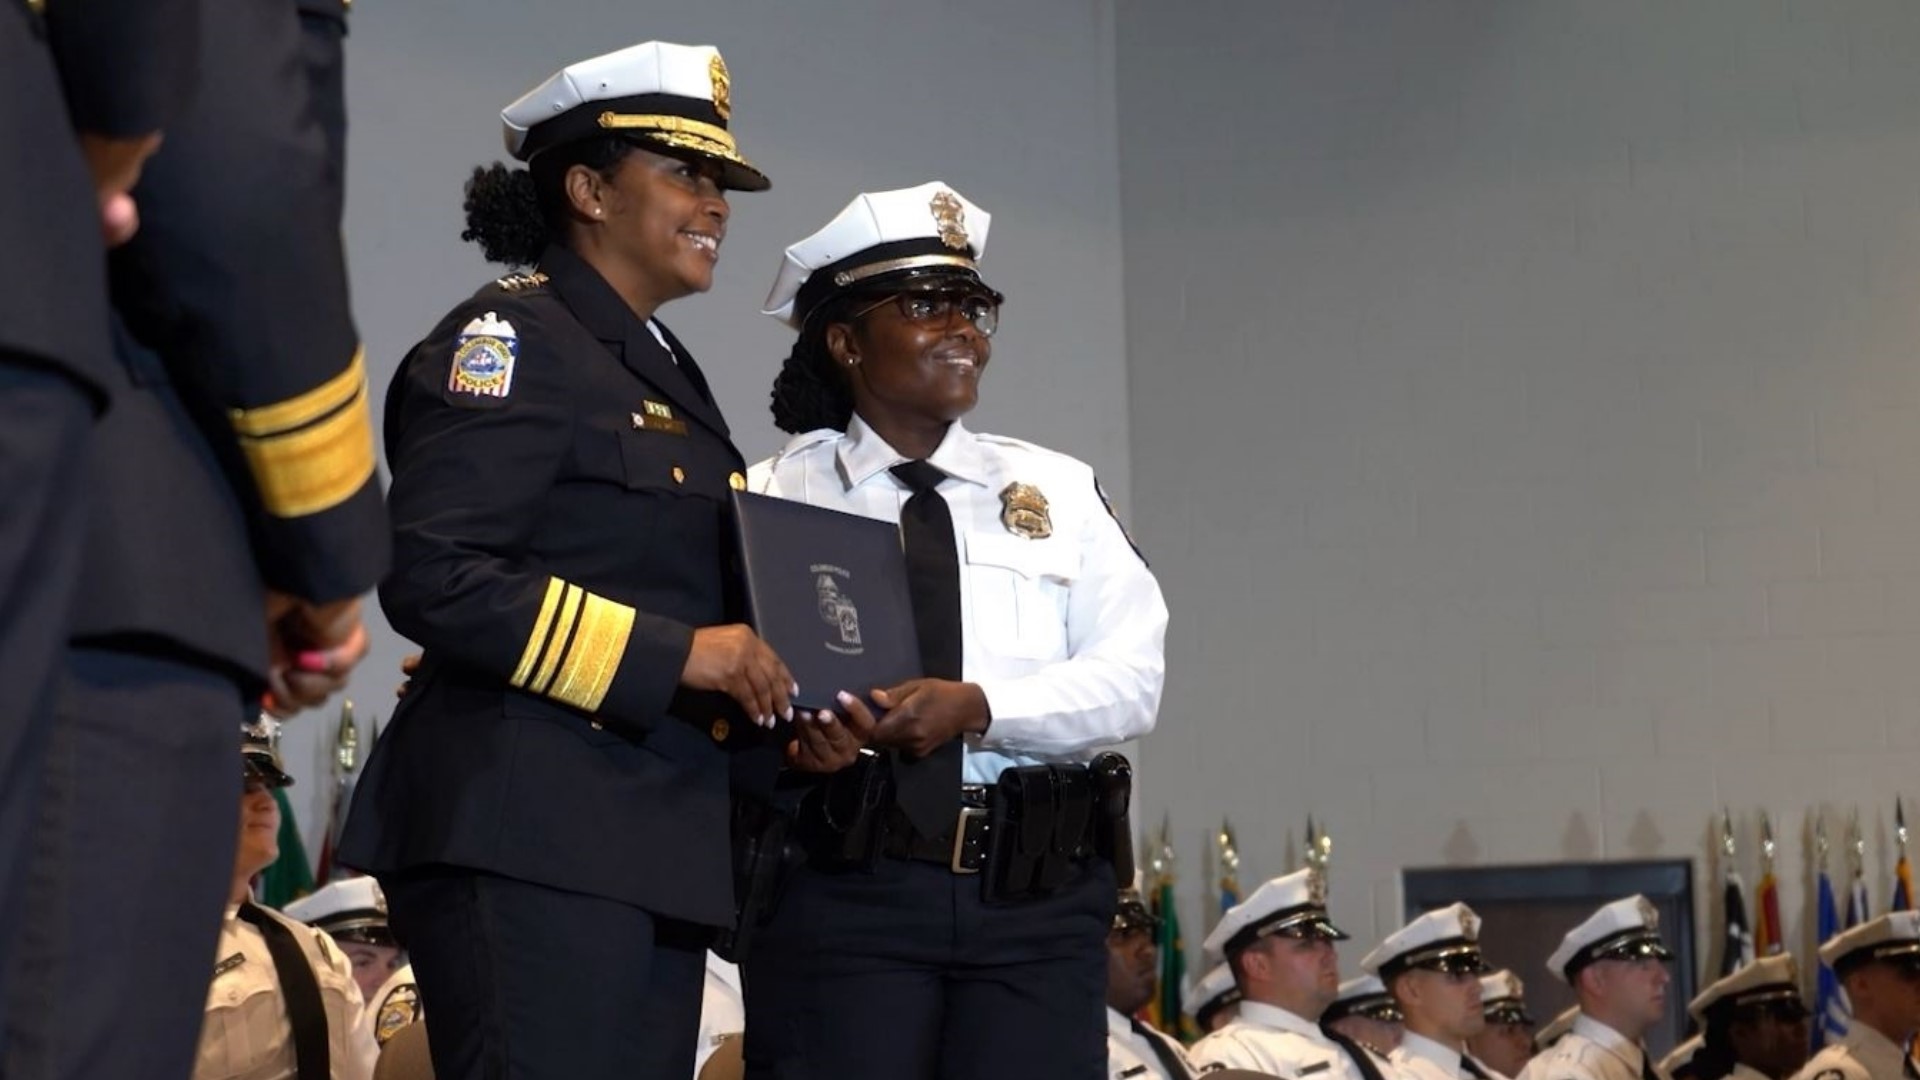 Currently, the division has 201 sworn female employees, which is just 11.2% of its total sworn officers.